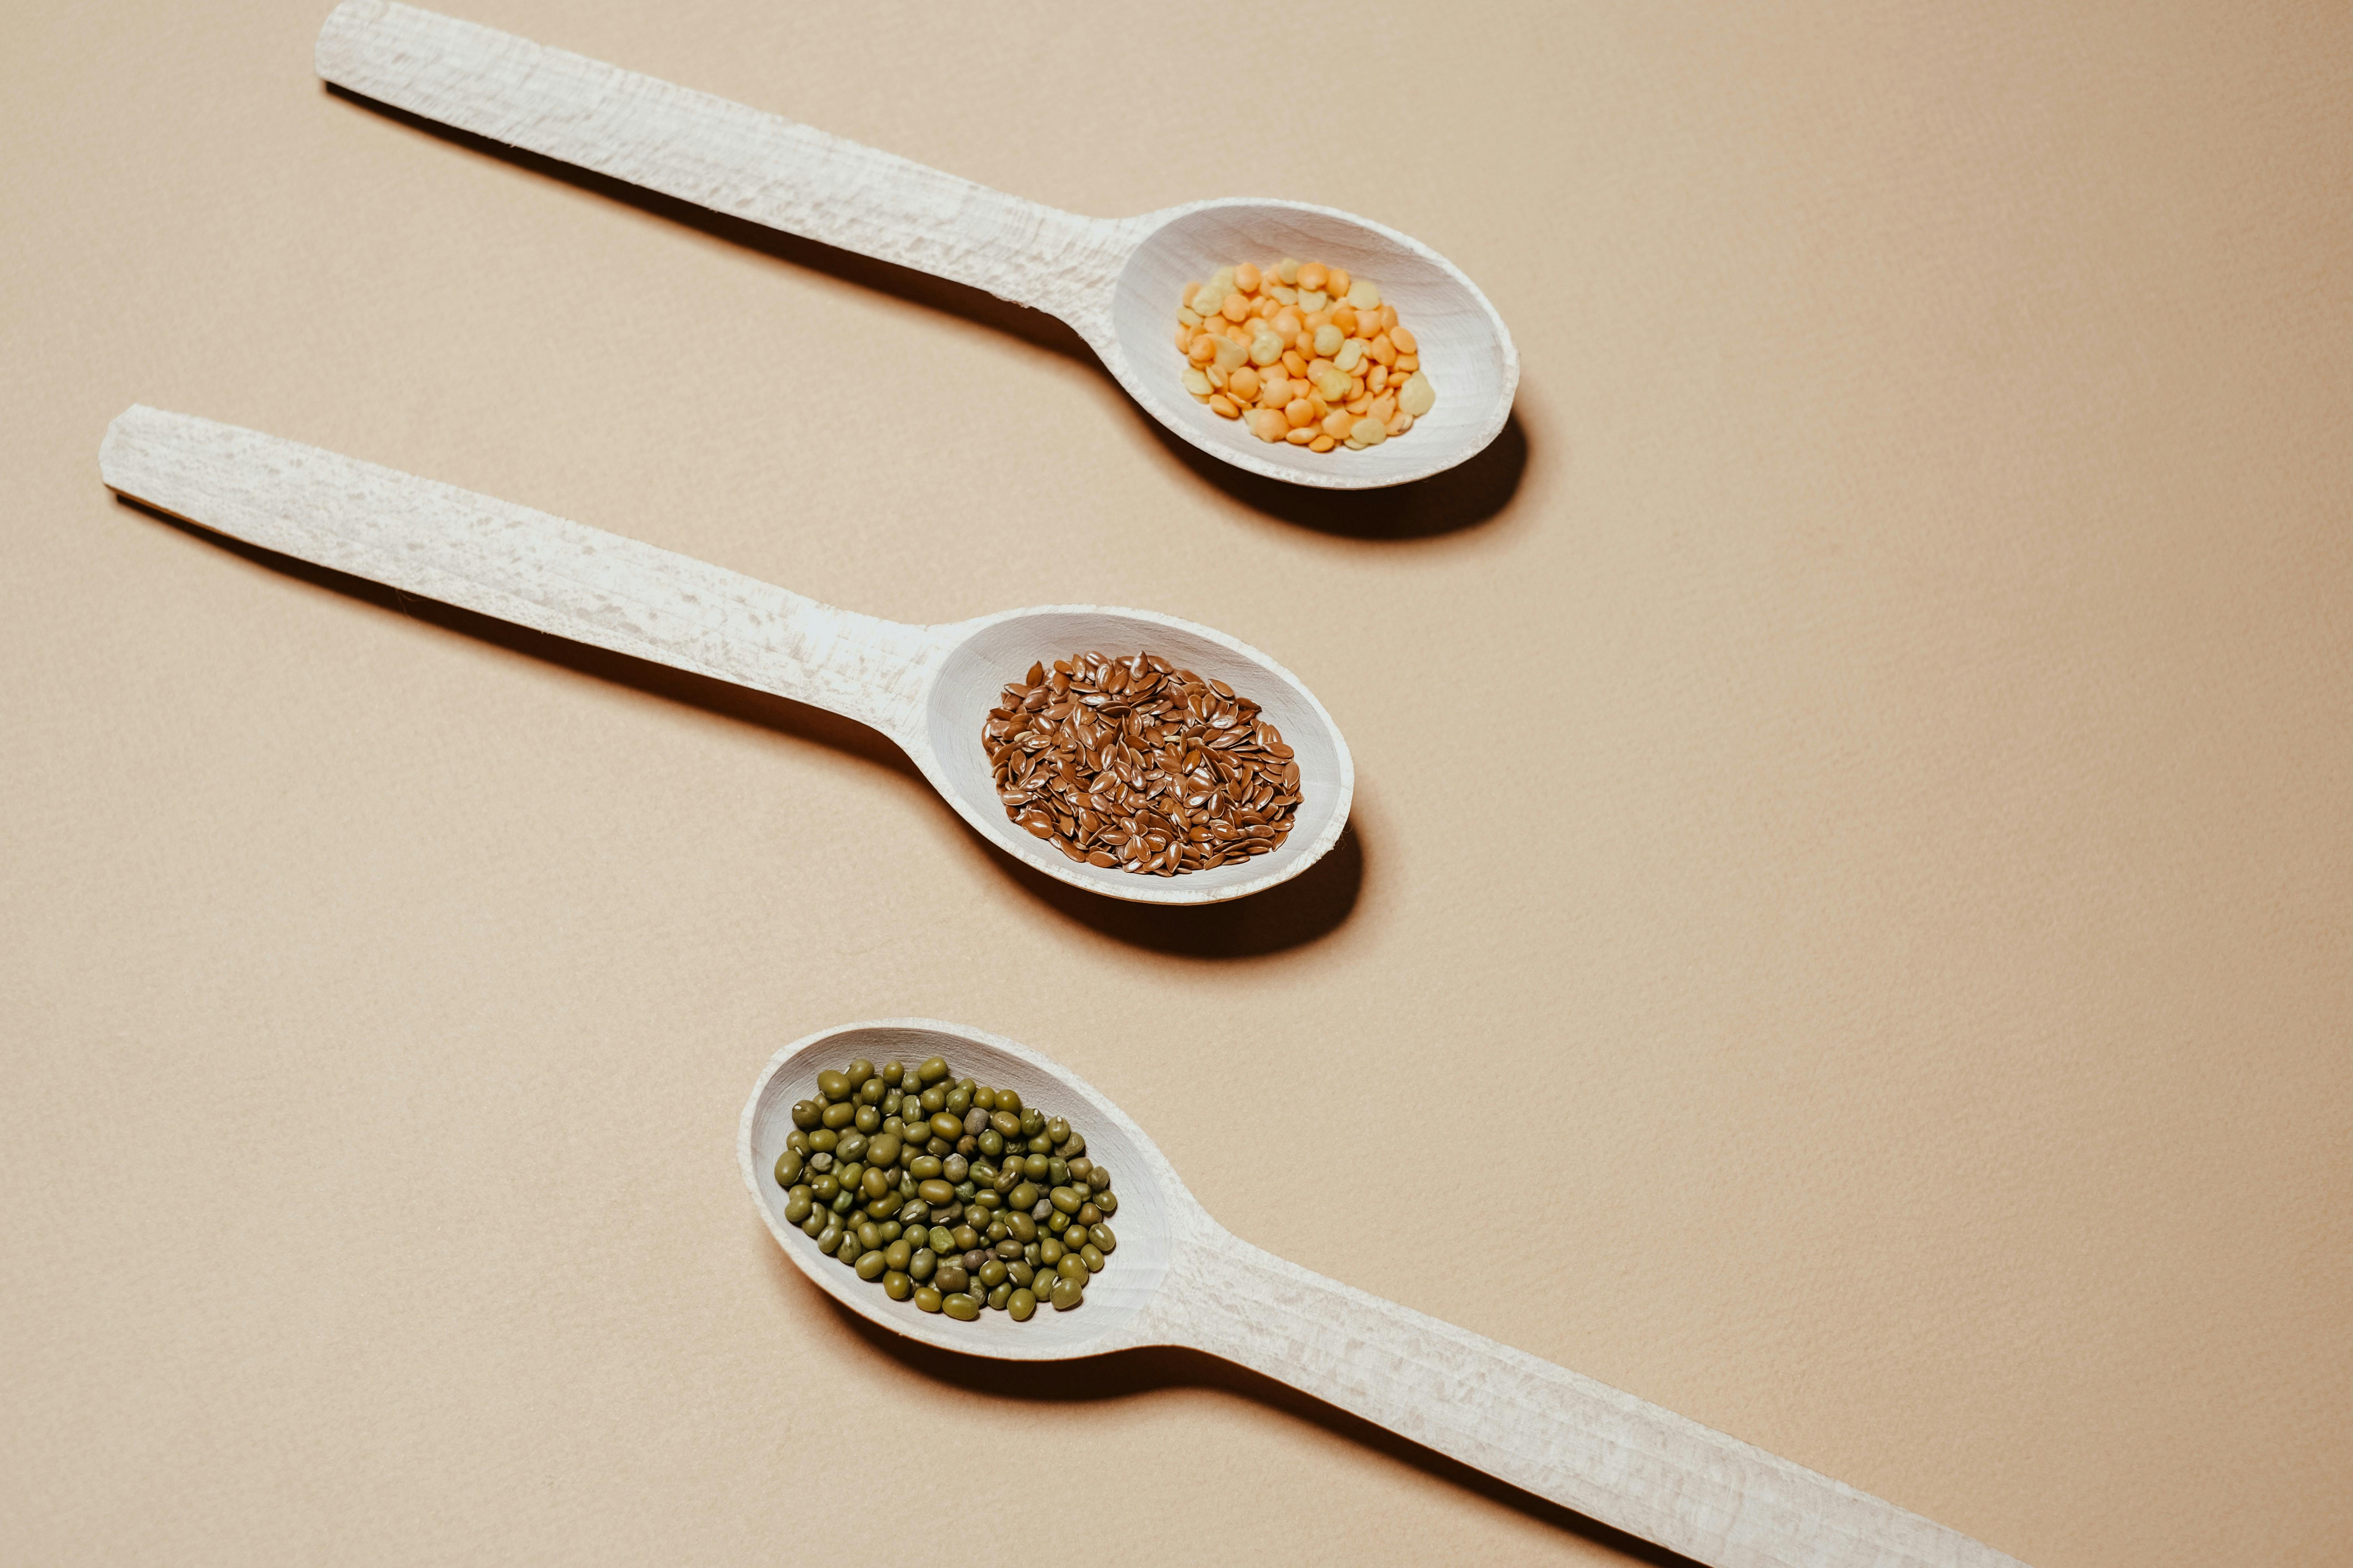 Red lentils and green lentils on spoons